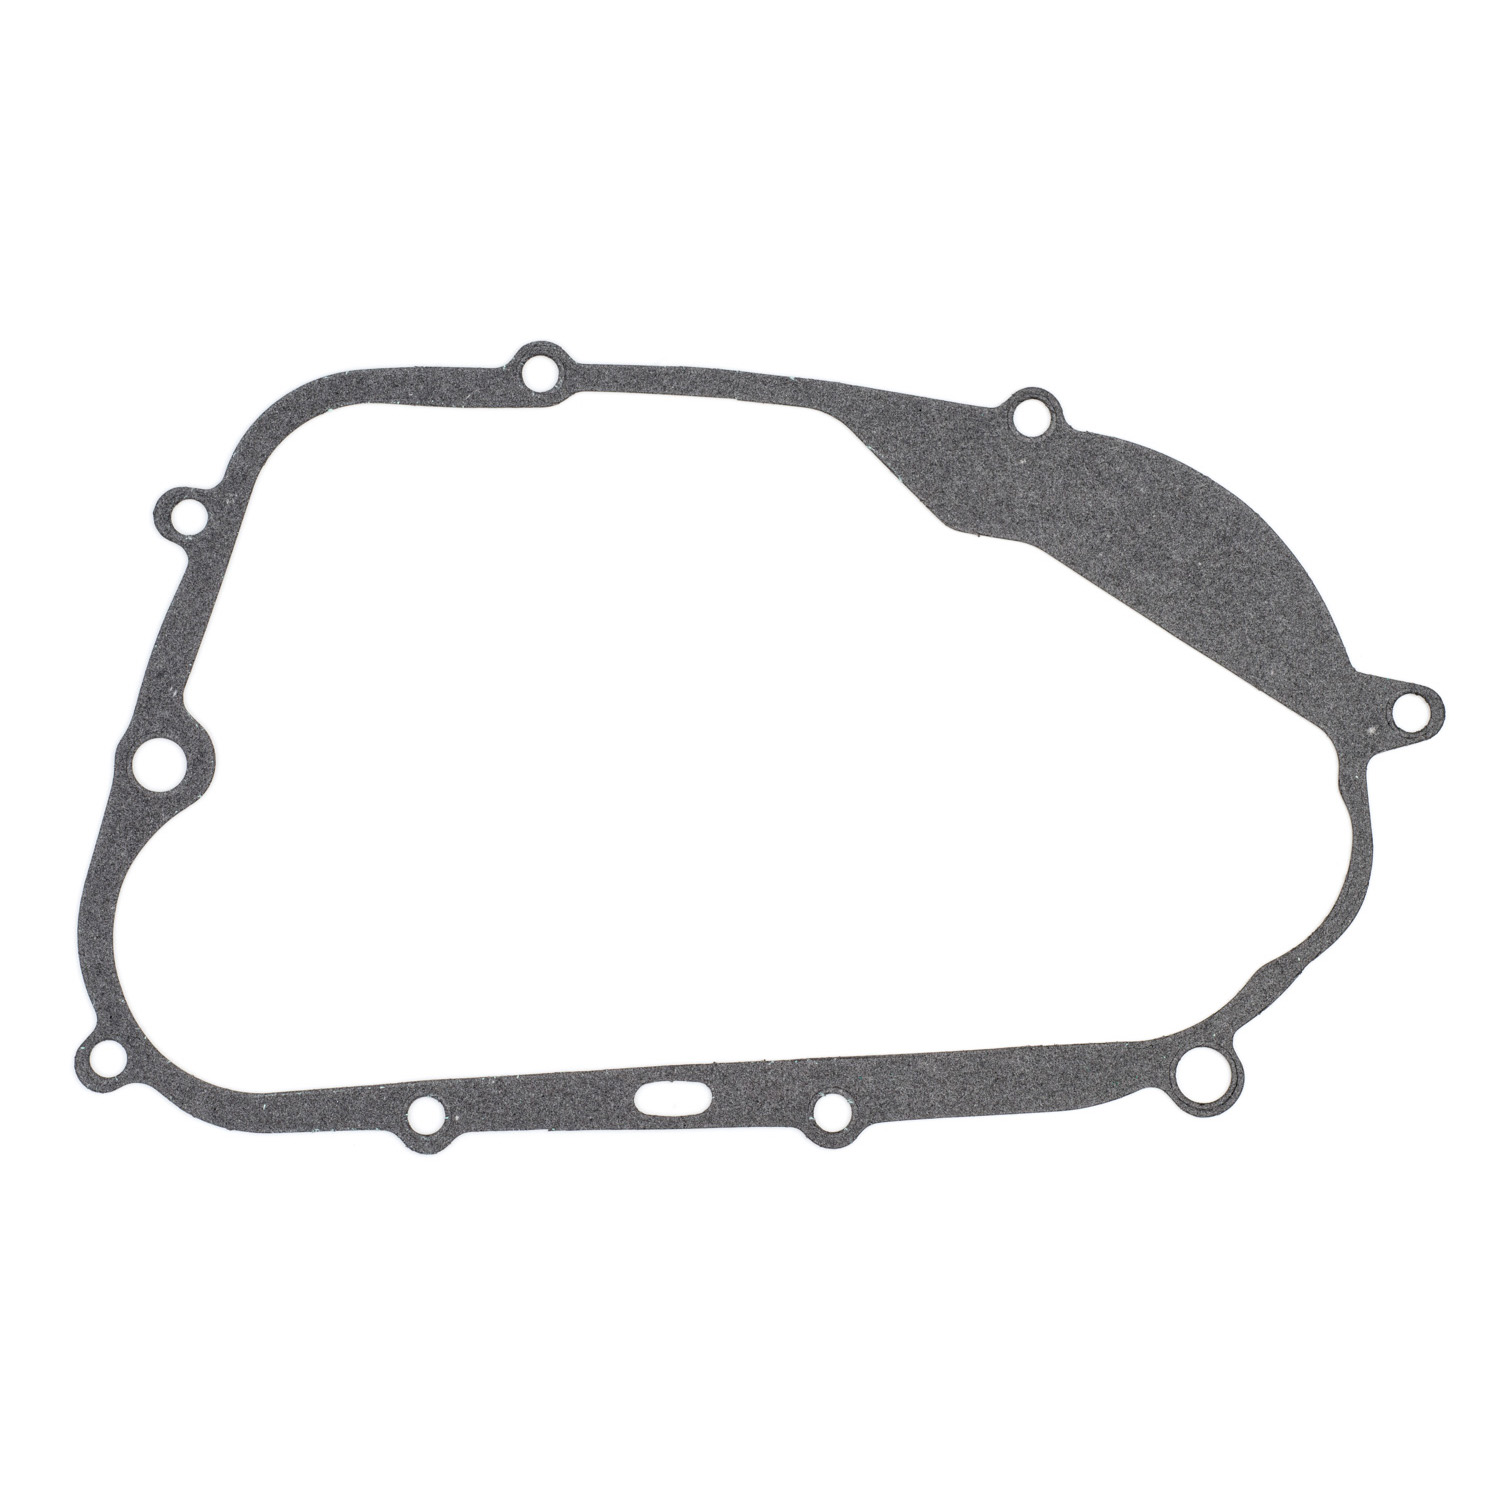 DT80MX Clutch Cover Gasket